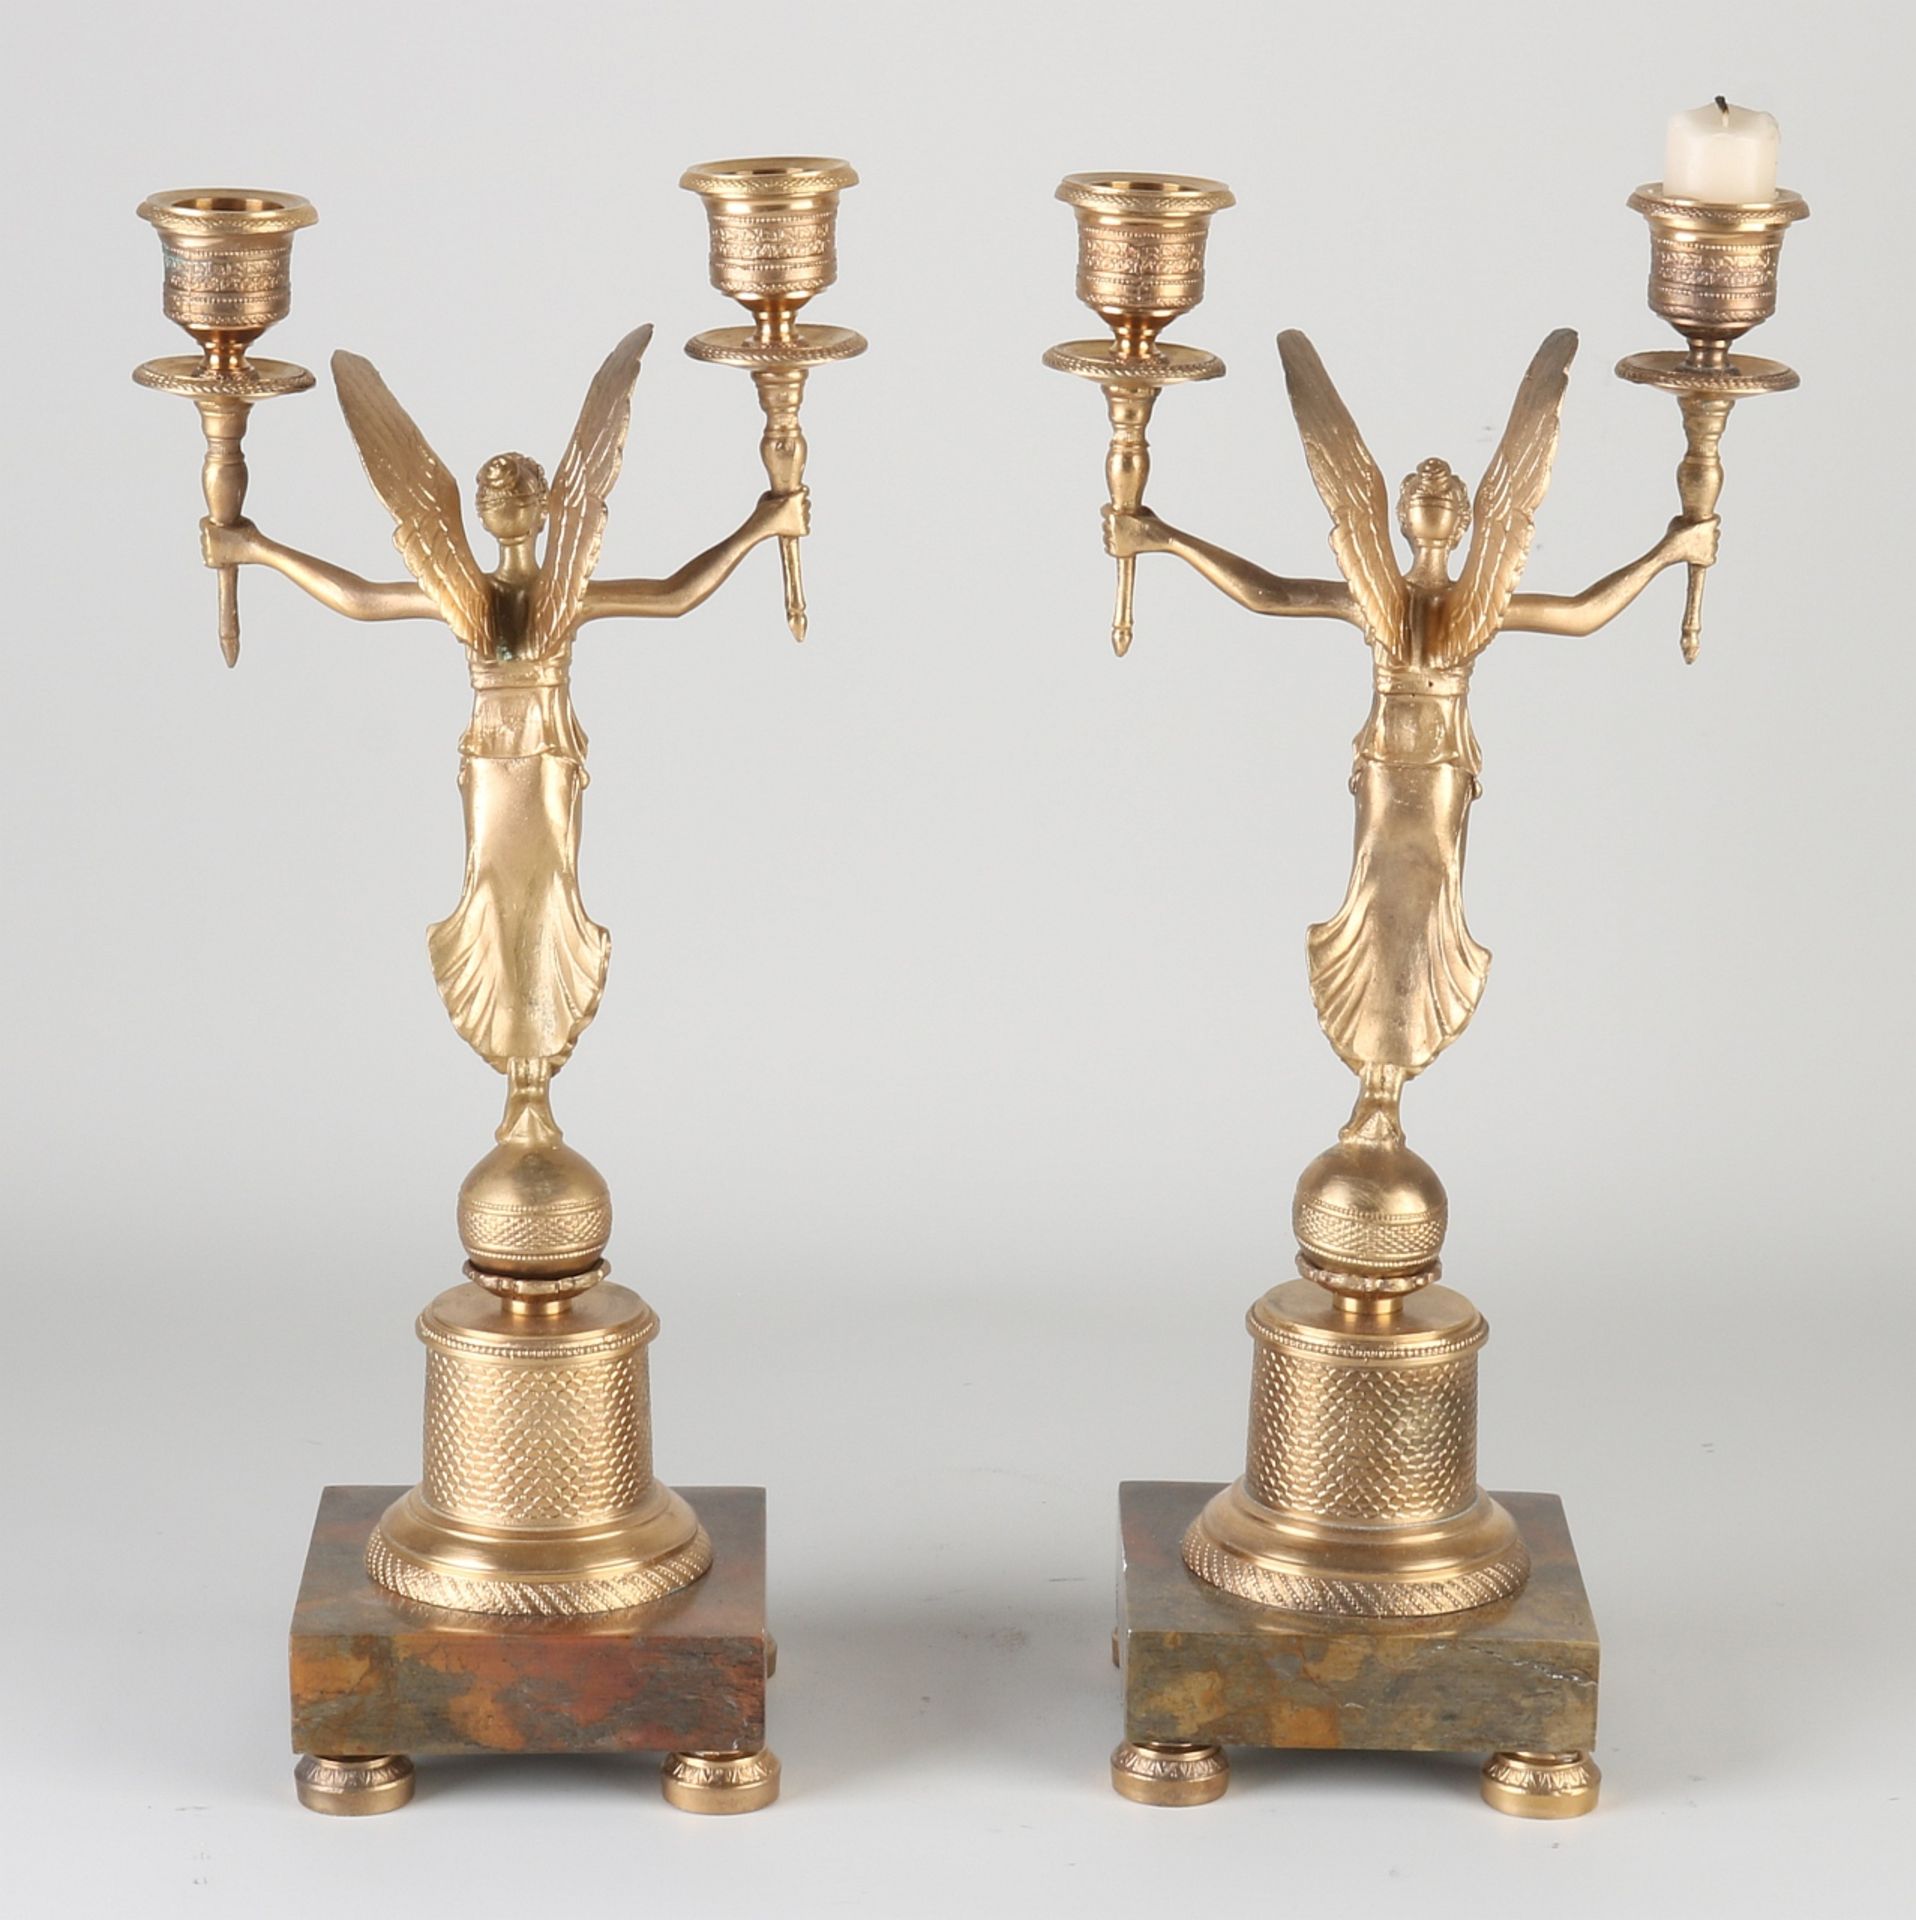 Two bronze empire style candlesticks - Image 2 of 2